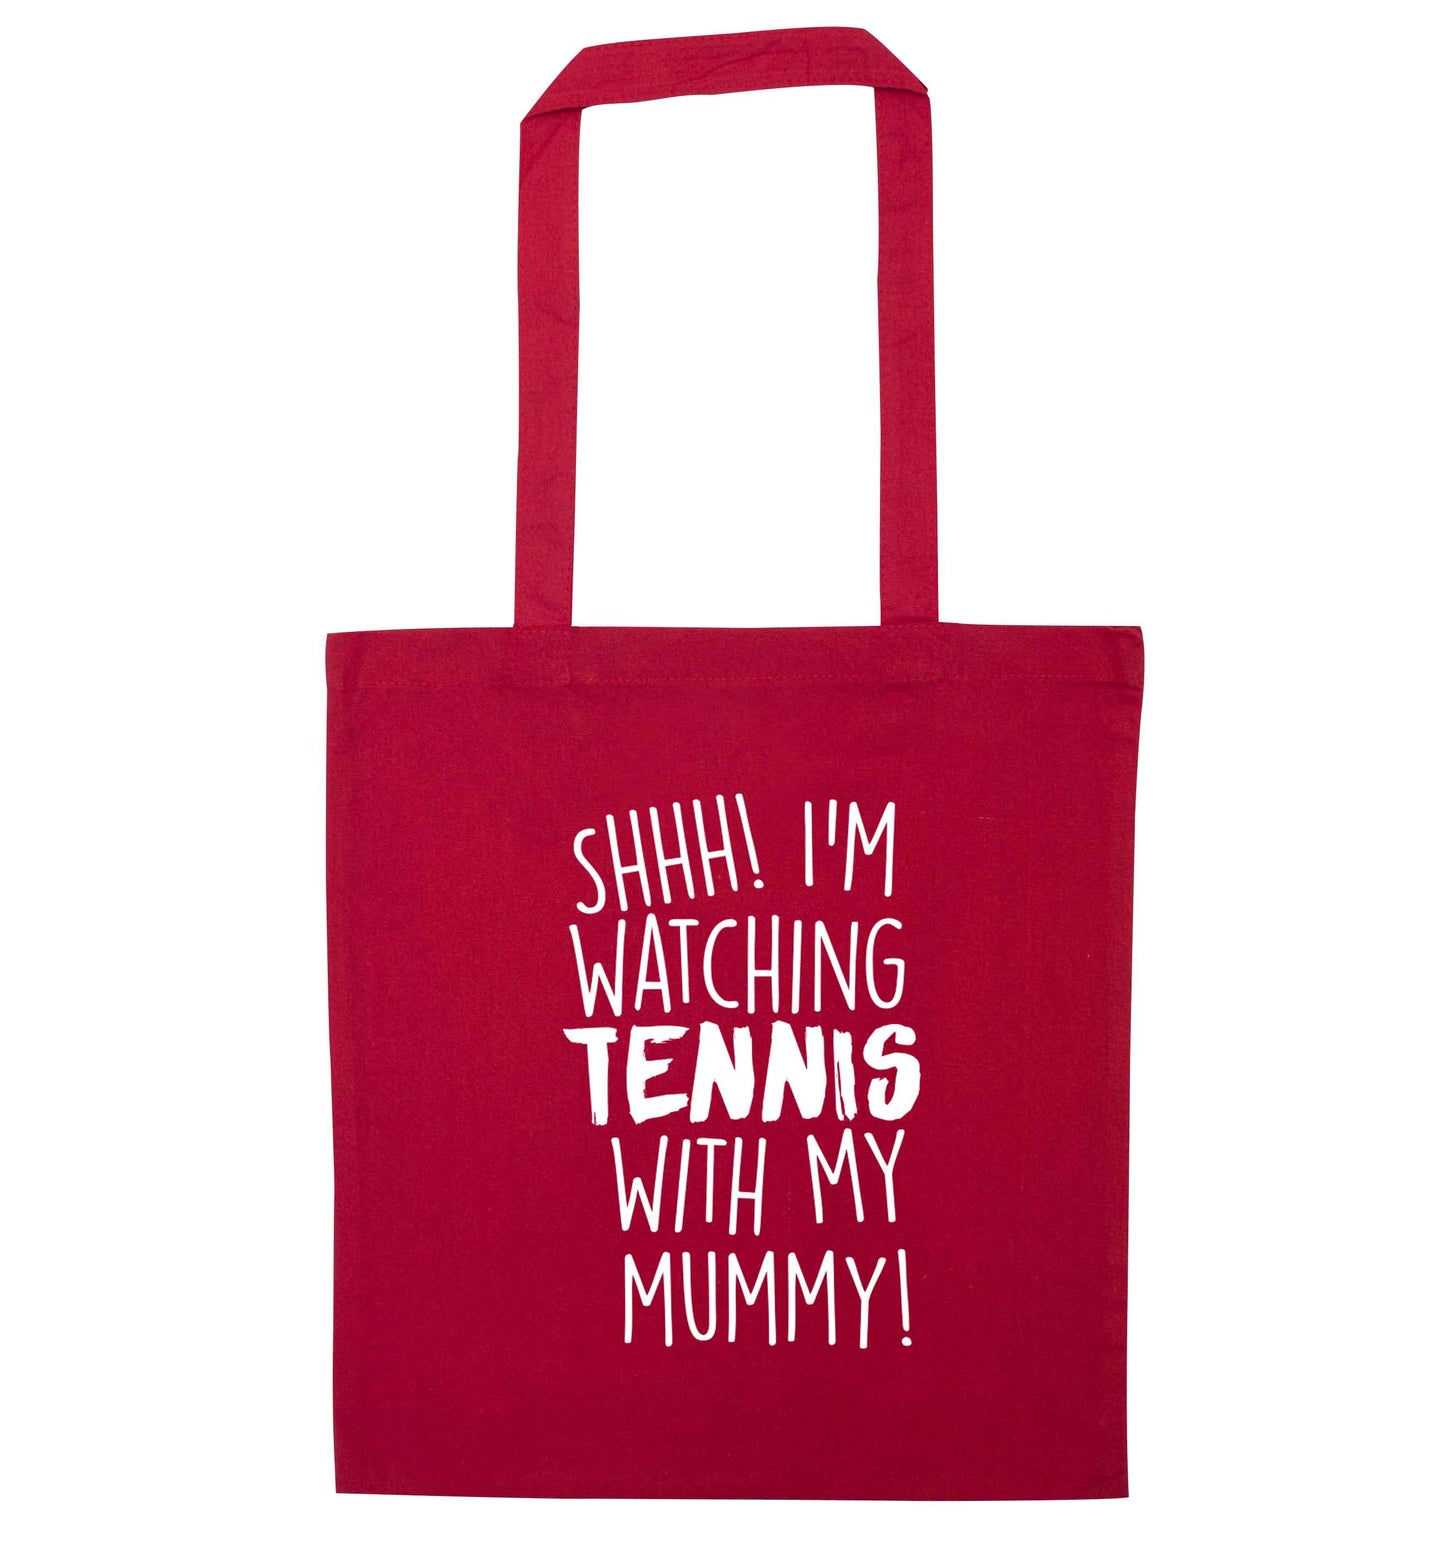 Shh! I'm watching tennis with my mummy! red tote bag